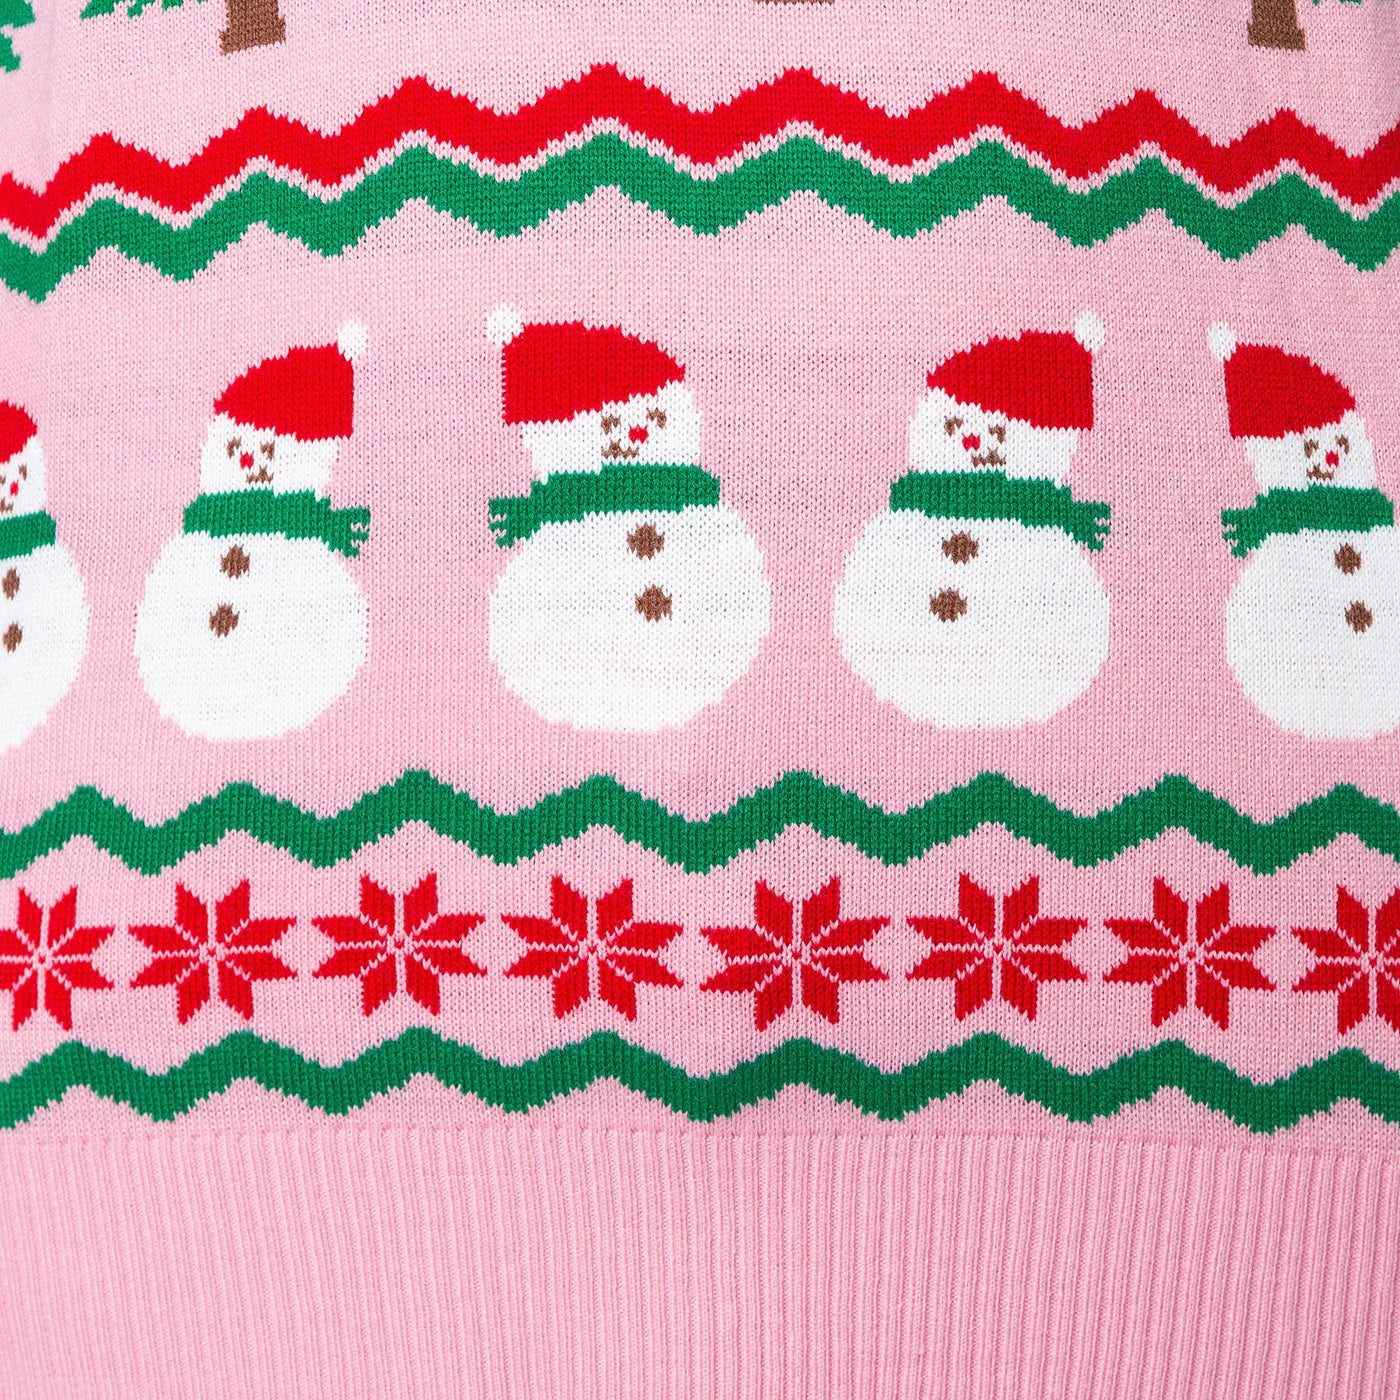 Women's Pink Ugly Christmas Sweater